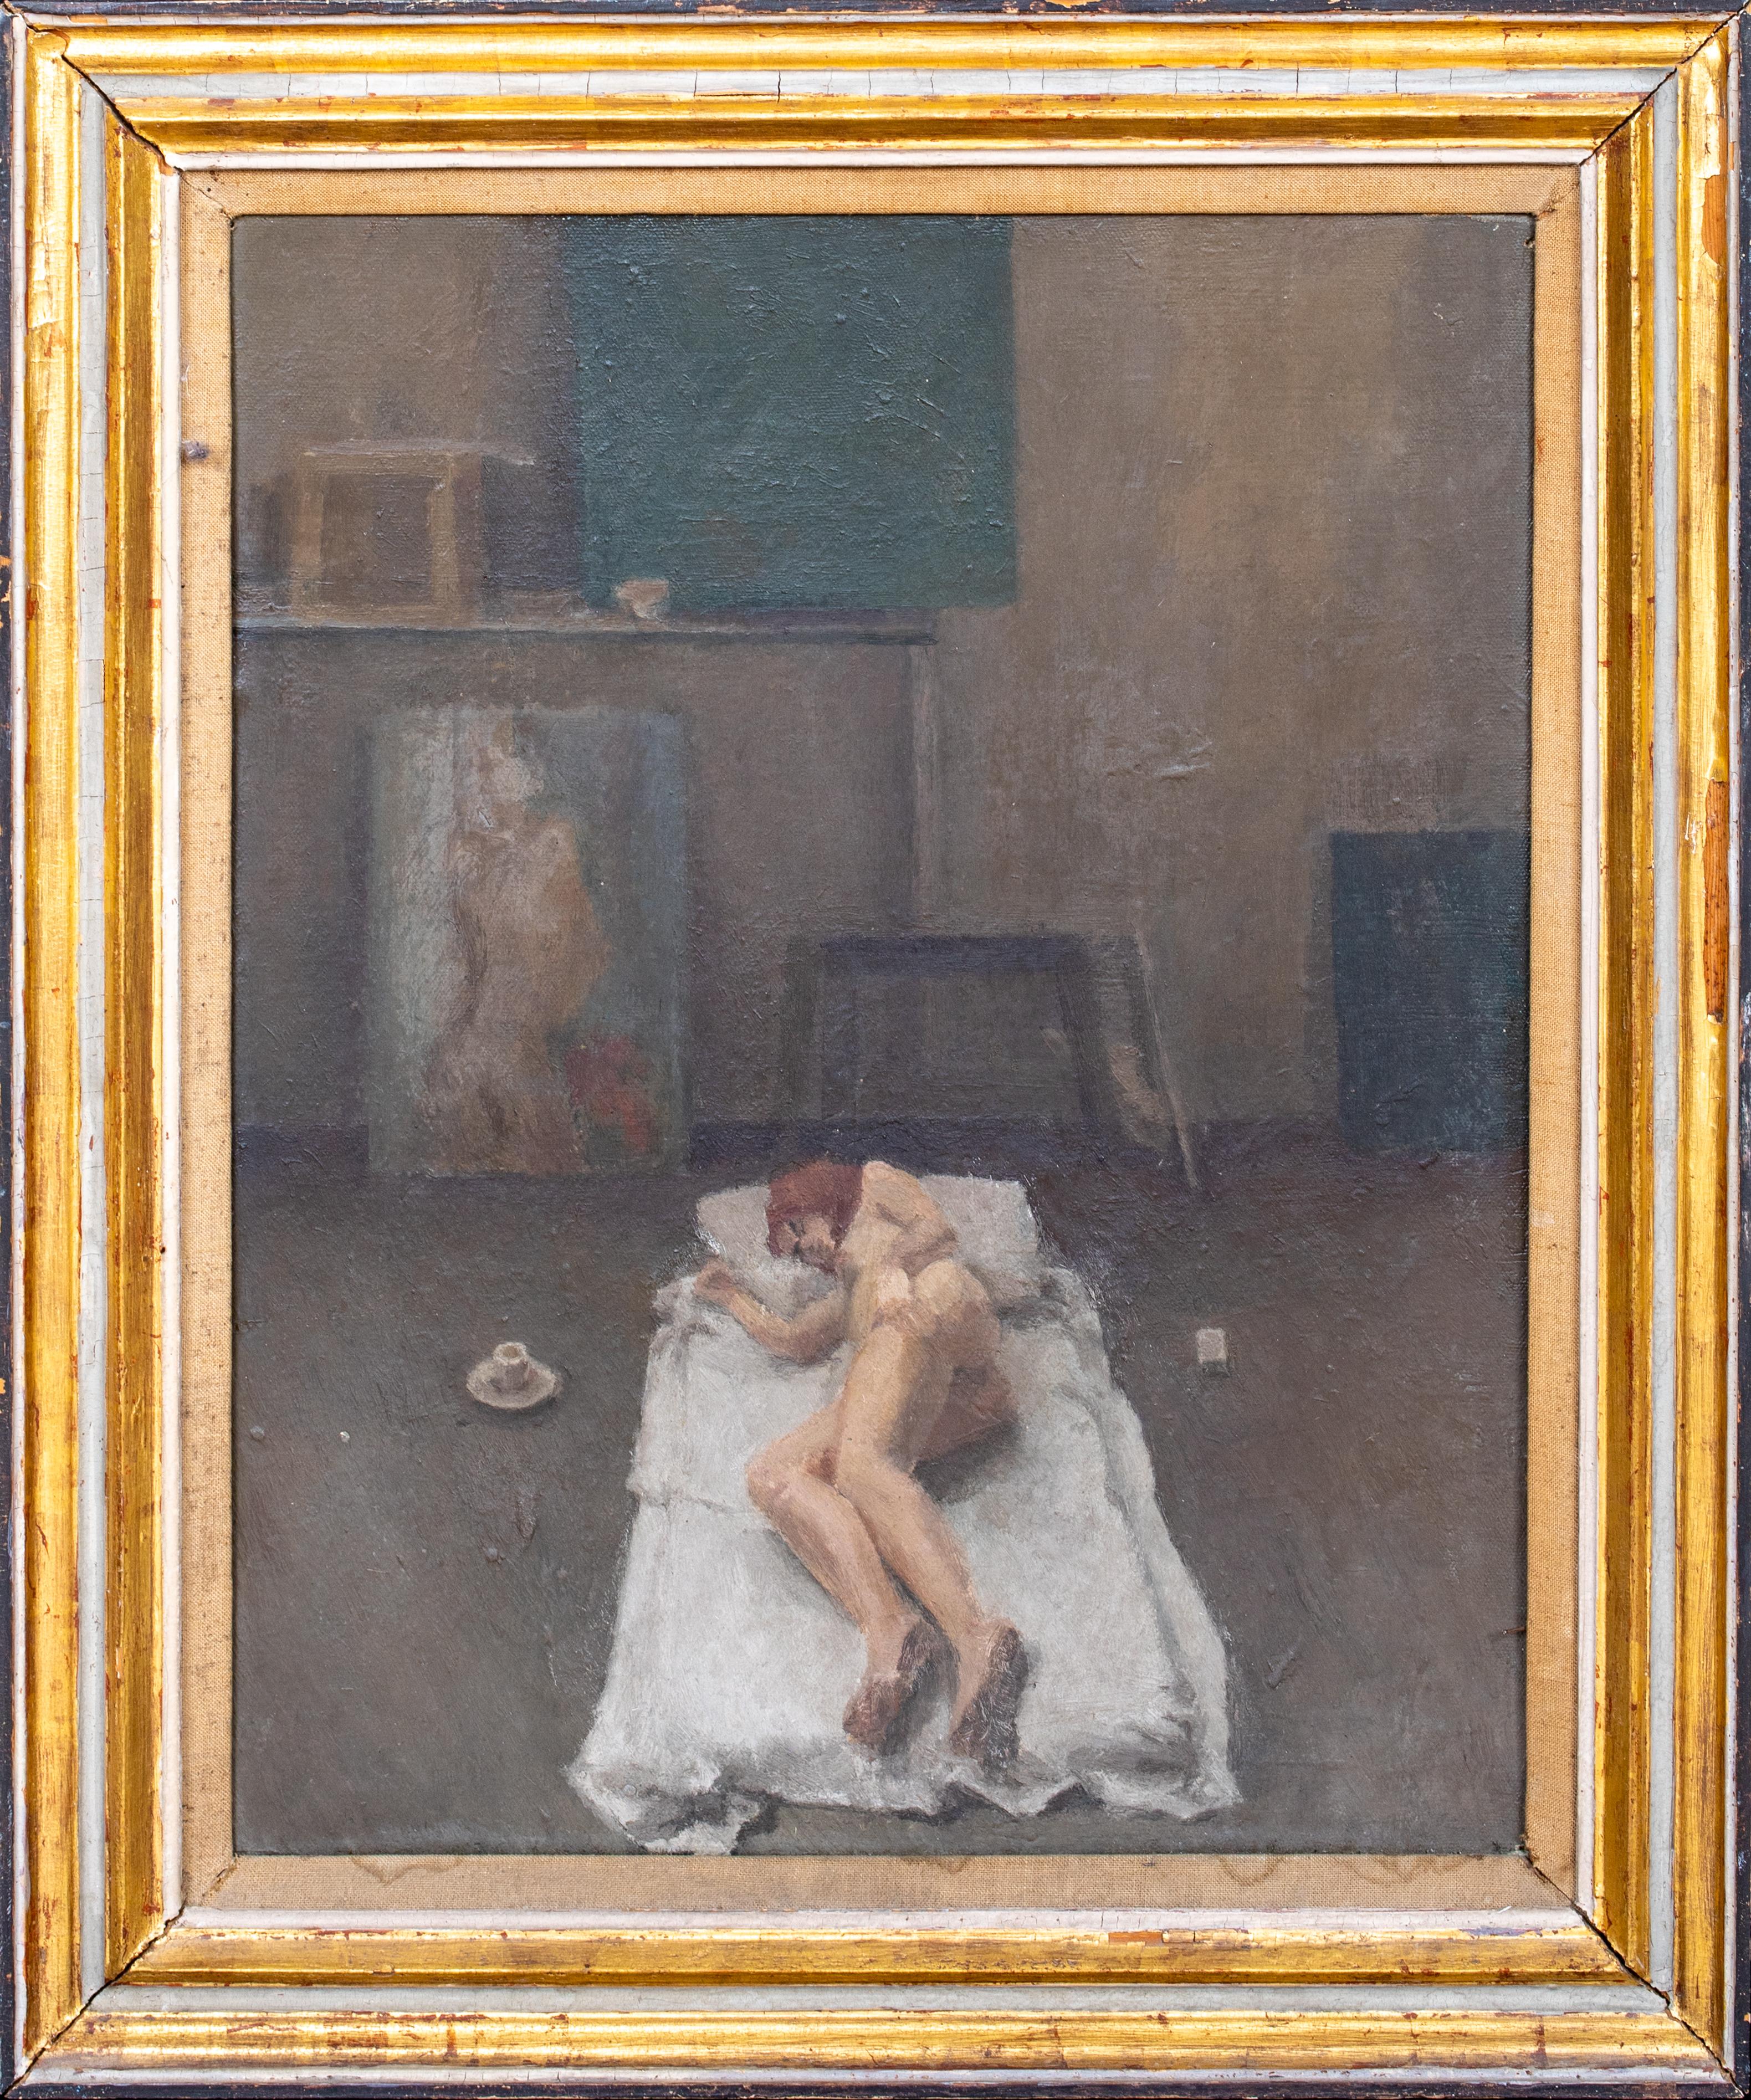 Unknown Portrait Painting - A Sleeping Nude, dated 1968   by EDMUND FAIRFAX-LUCY (1945-2020)